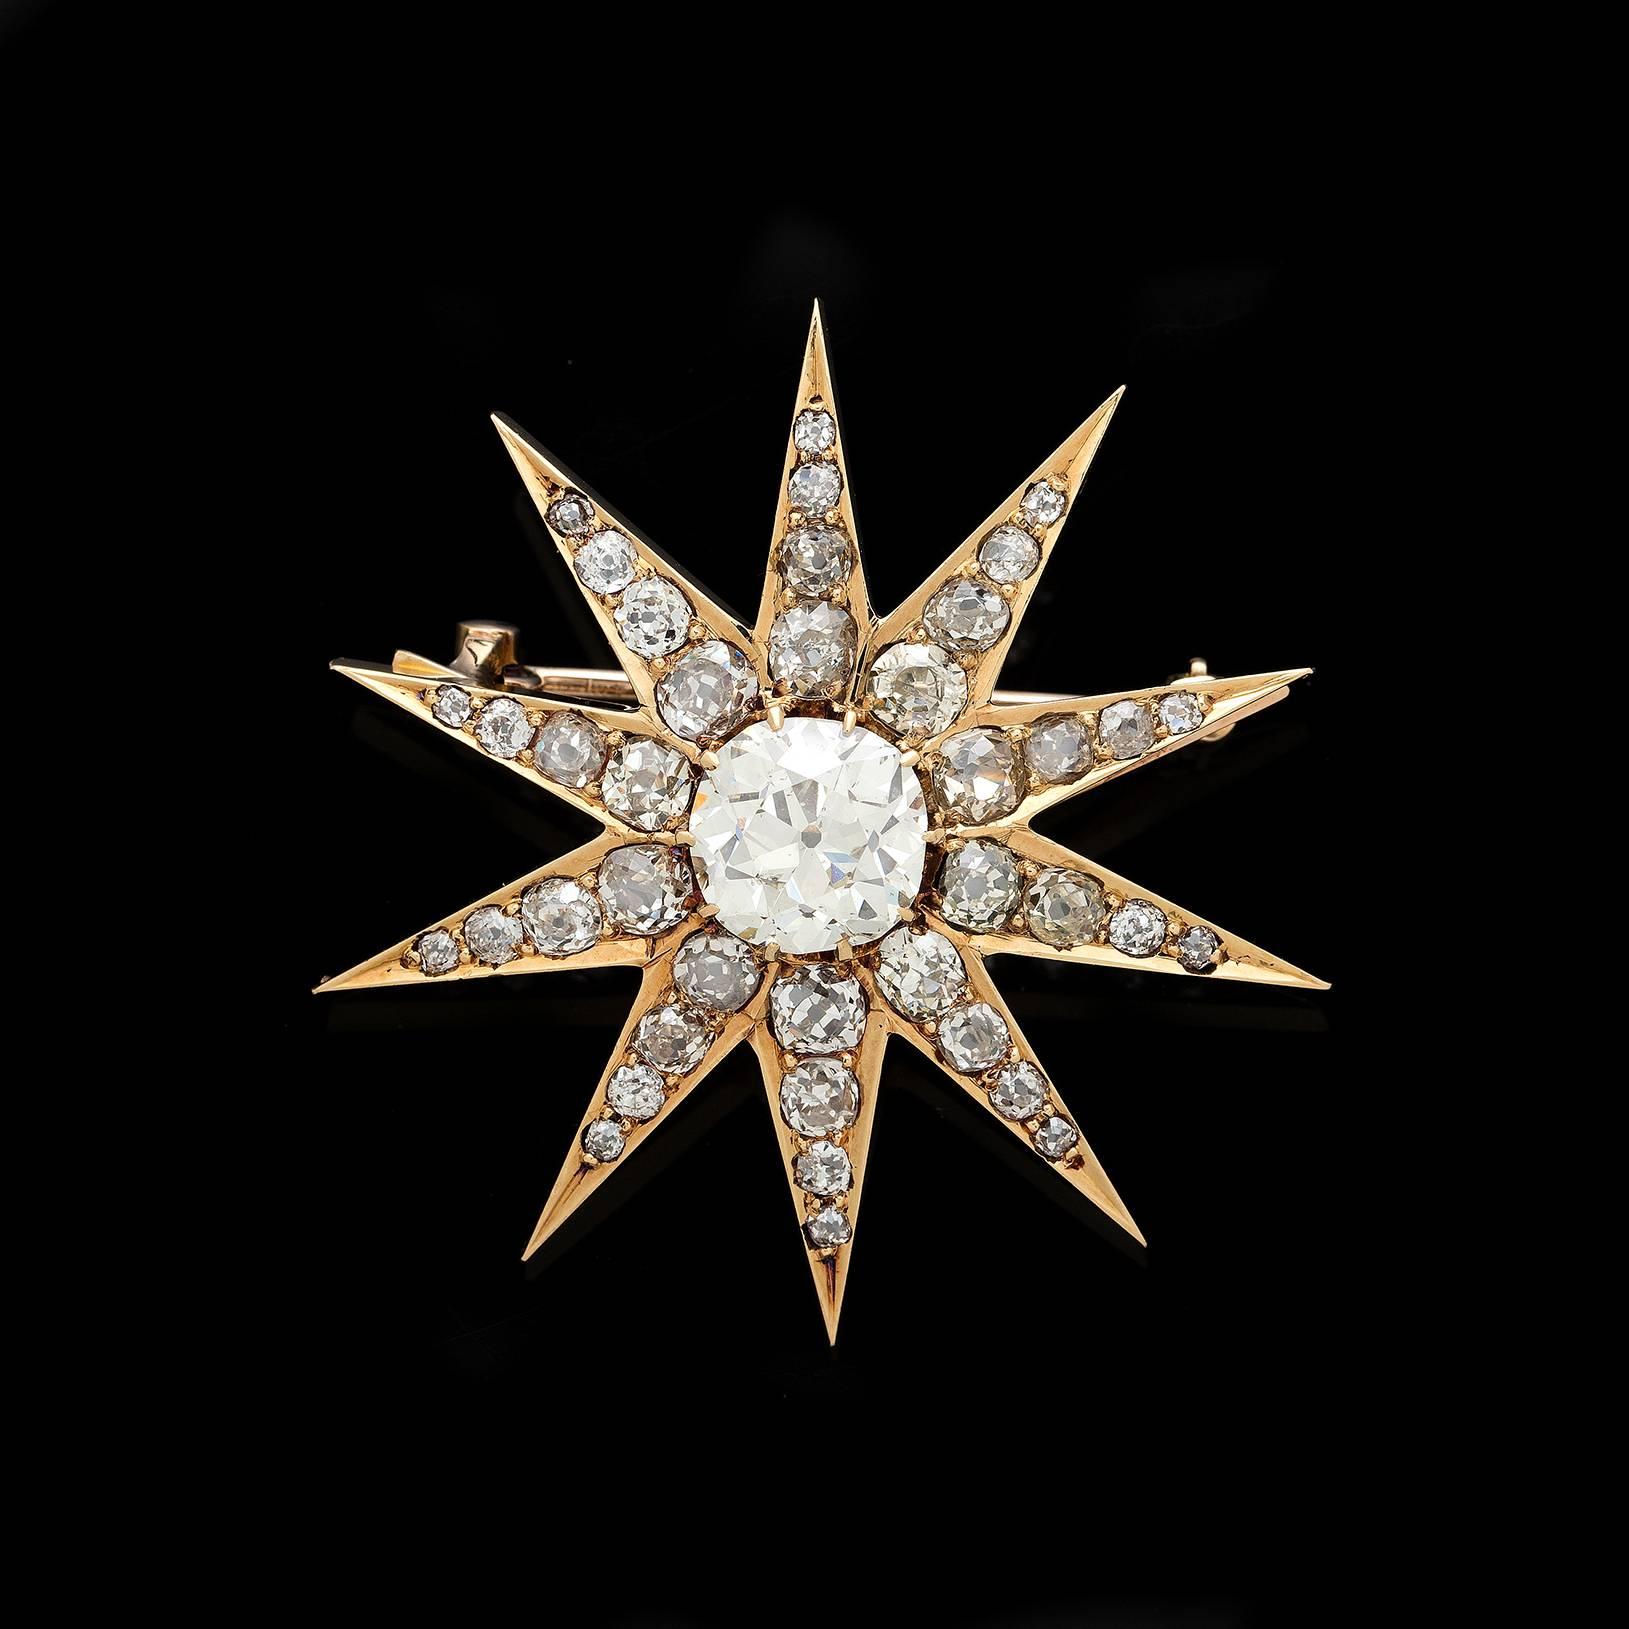 Attention grabbing 14k yellow gold star pin from the Victorian Grand Period circa 1860-1880s. Featured in the center is a 2.25 carat old mine cut diamond surrounded by 40 melee size old mine cut diamonds totaling 2.60 carats. A detail that might be